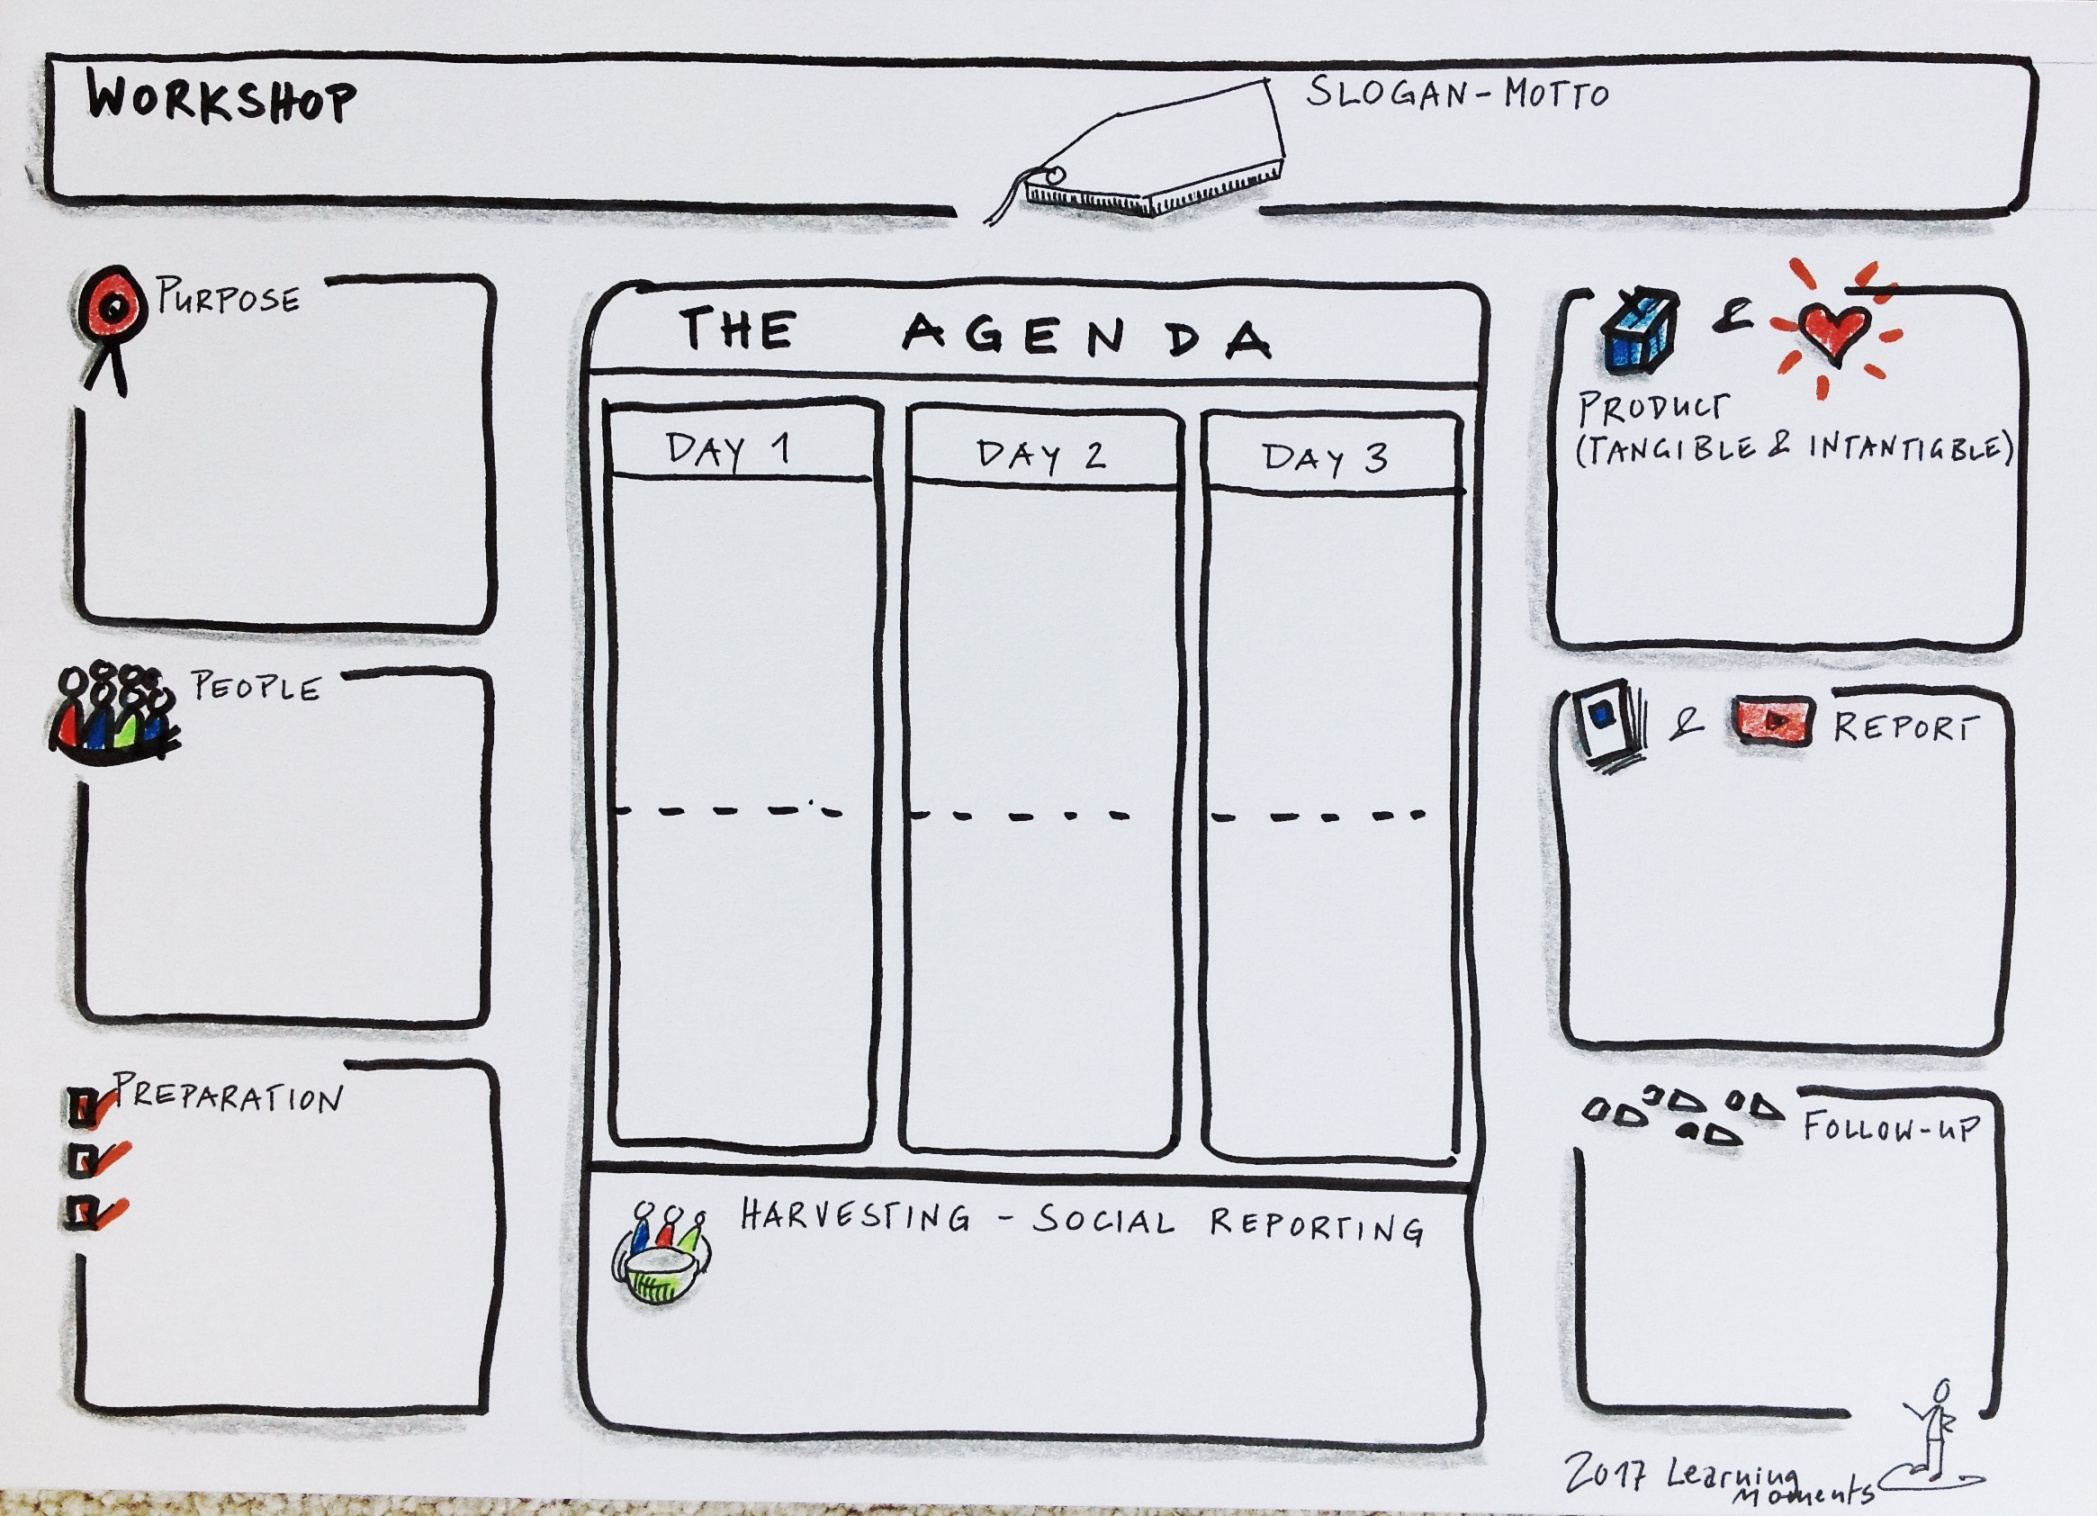 the workshop agenda shaper  a template for a visual workshop agenda template excel